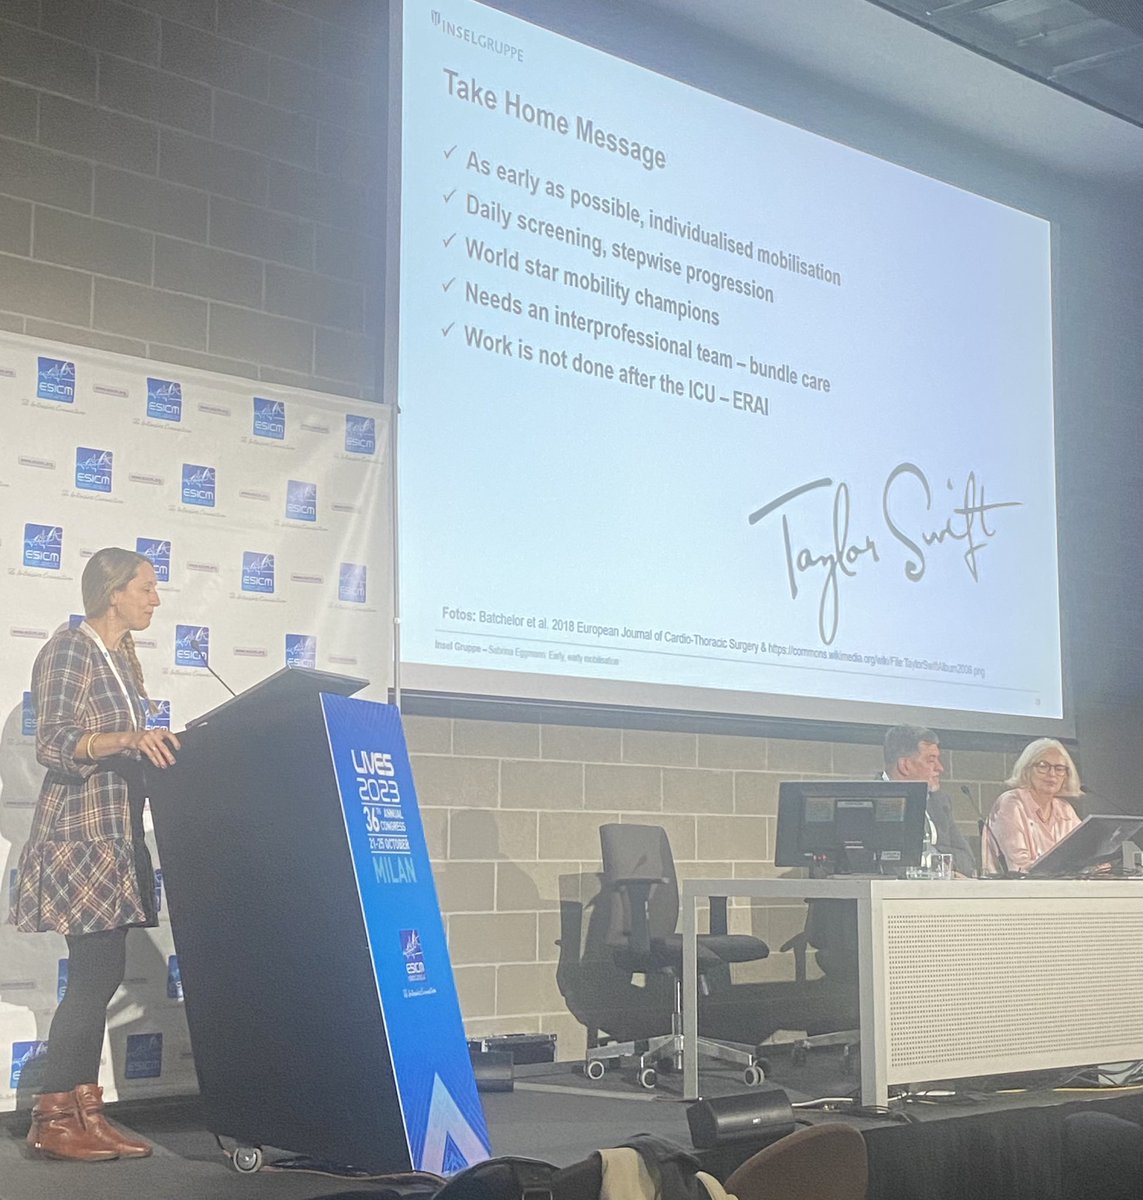 Fantastic talk on #ICUrehab @SabrinaEggmann @ESICM #LIVES2023 💭early rehab is different for each patient 💡work isn’t done after ICU, “ERAI” the “new ERAS” for ICU - early rehabilitation after ICU🙏🏻 for sharing our work 🔗read more about our study: tinyurl.com/2dvwwwua